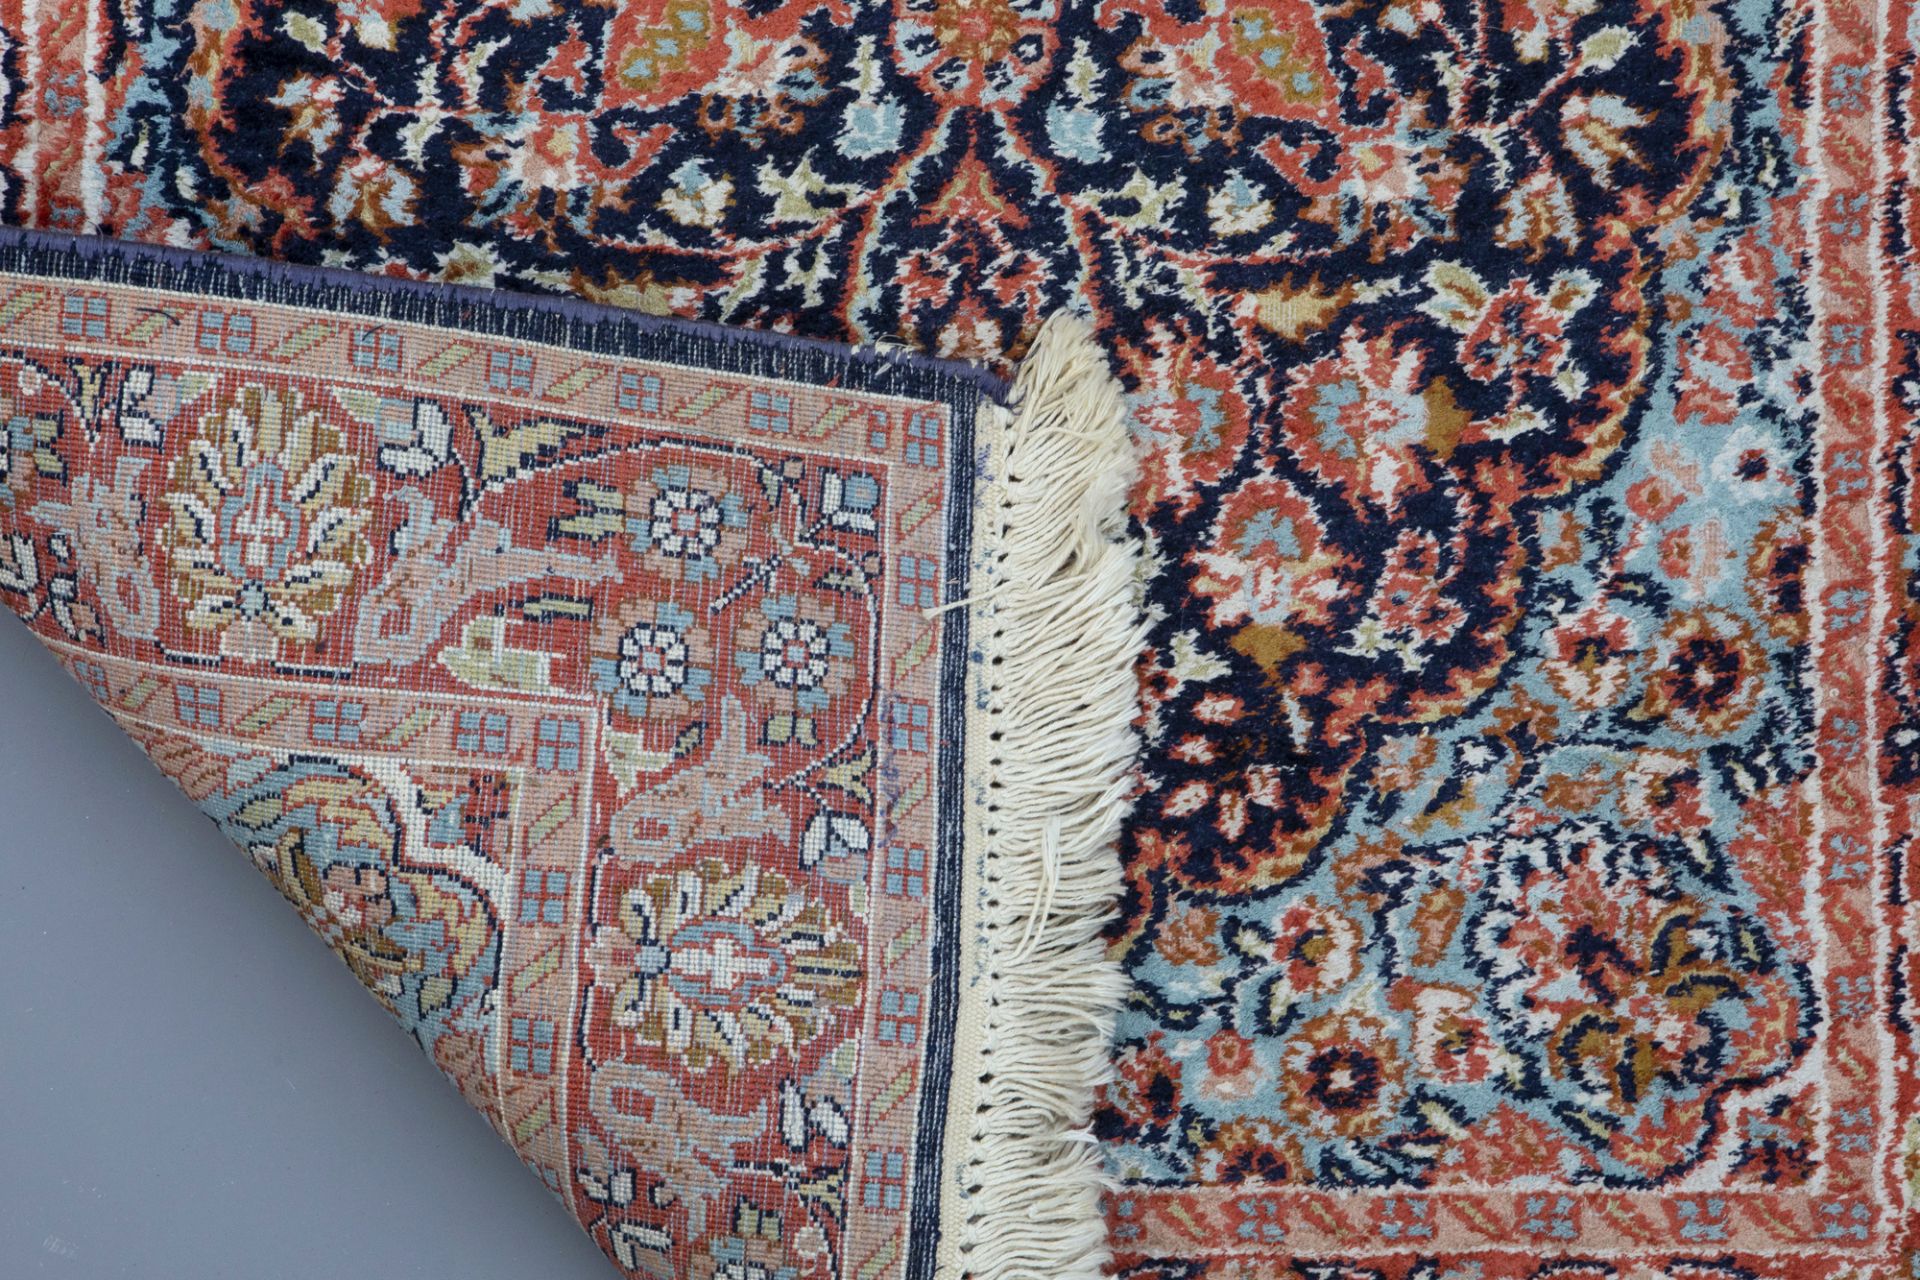 Two Oriental prayer rugs with floral design, silk on cotton, 20th C. - Image 4 of 4